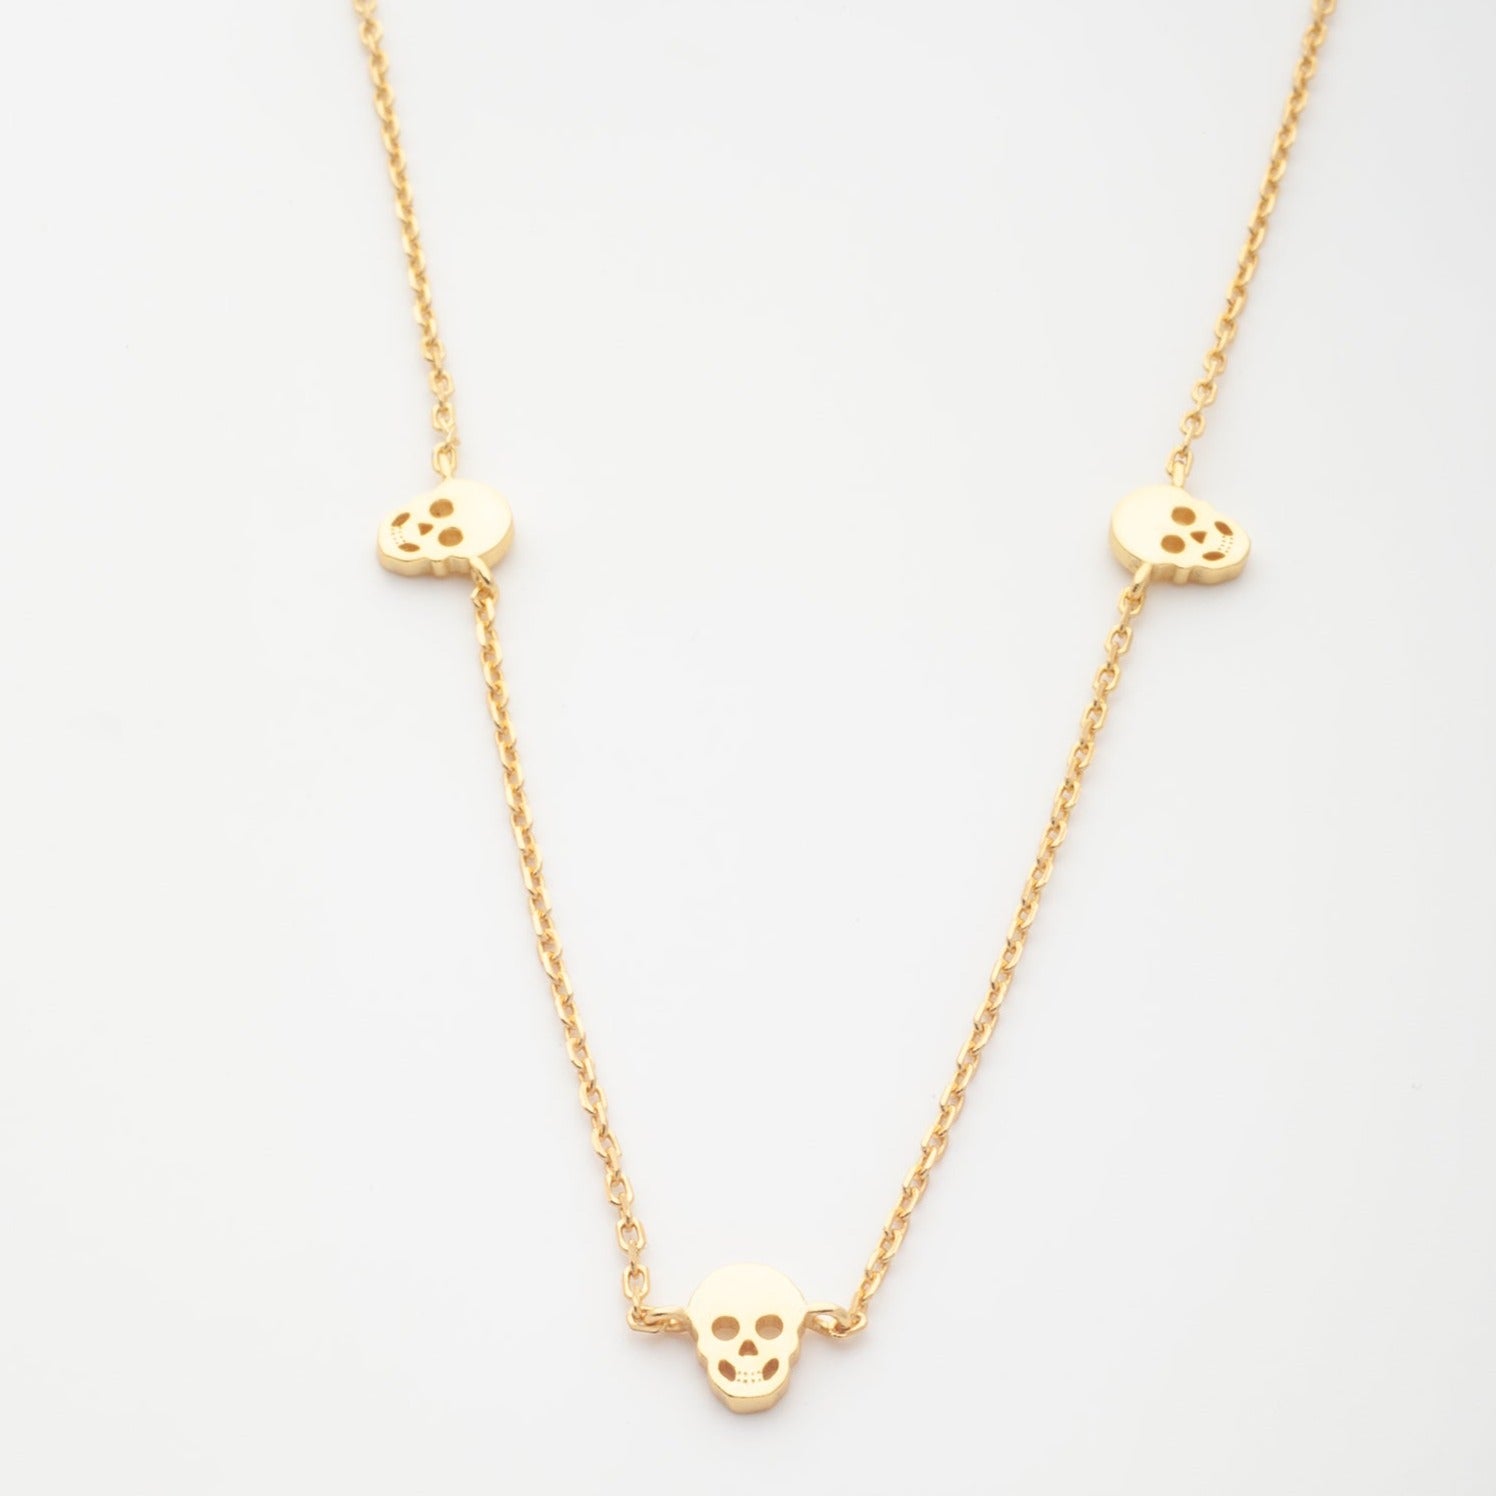 Skull Charm Necklace in Gold